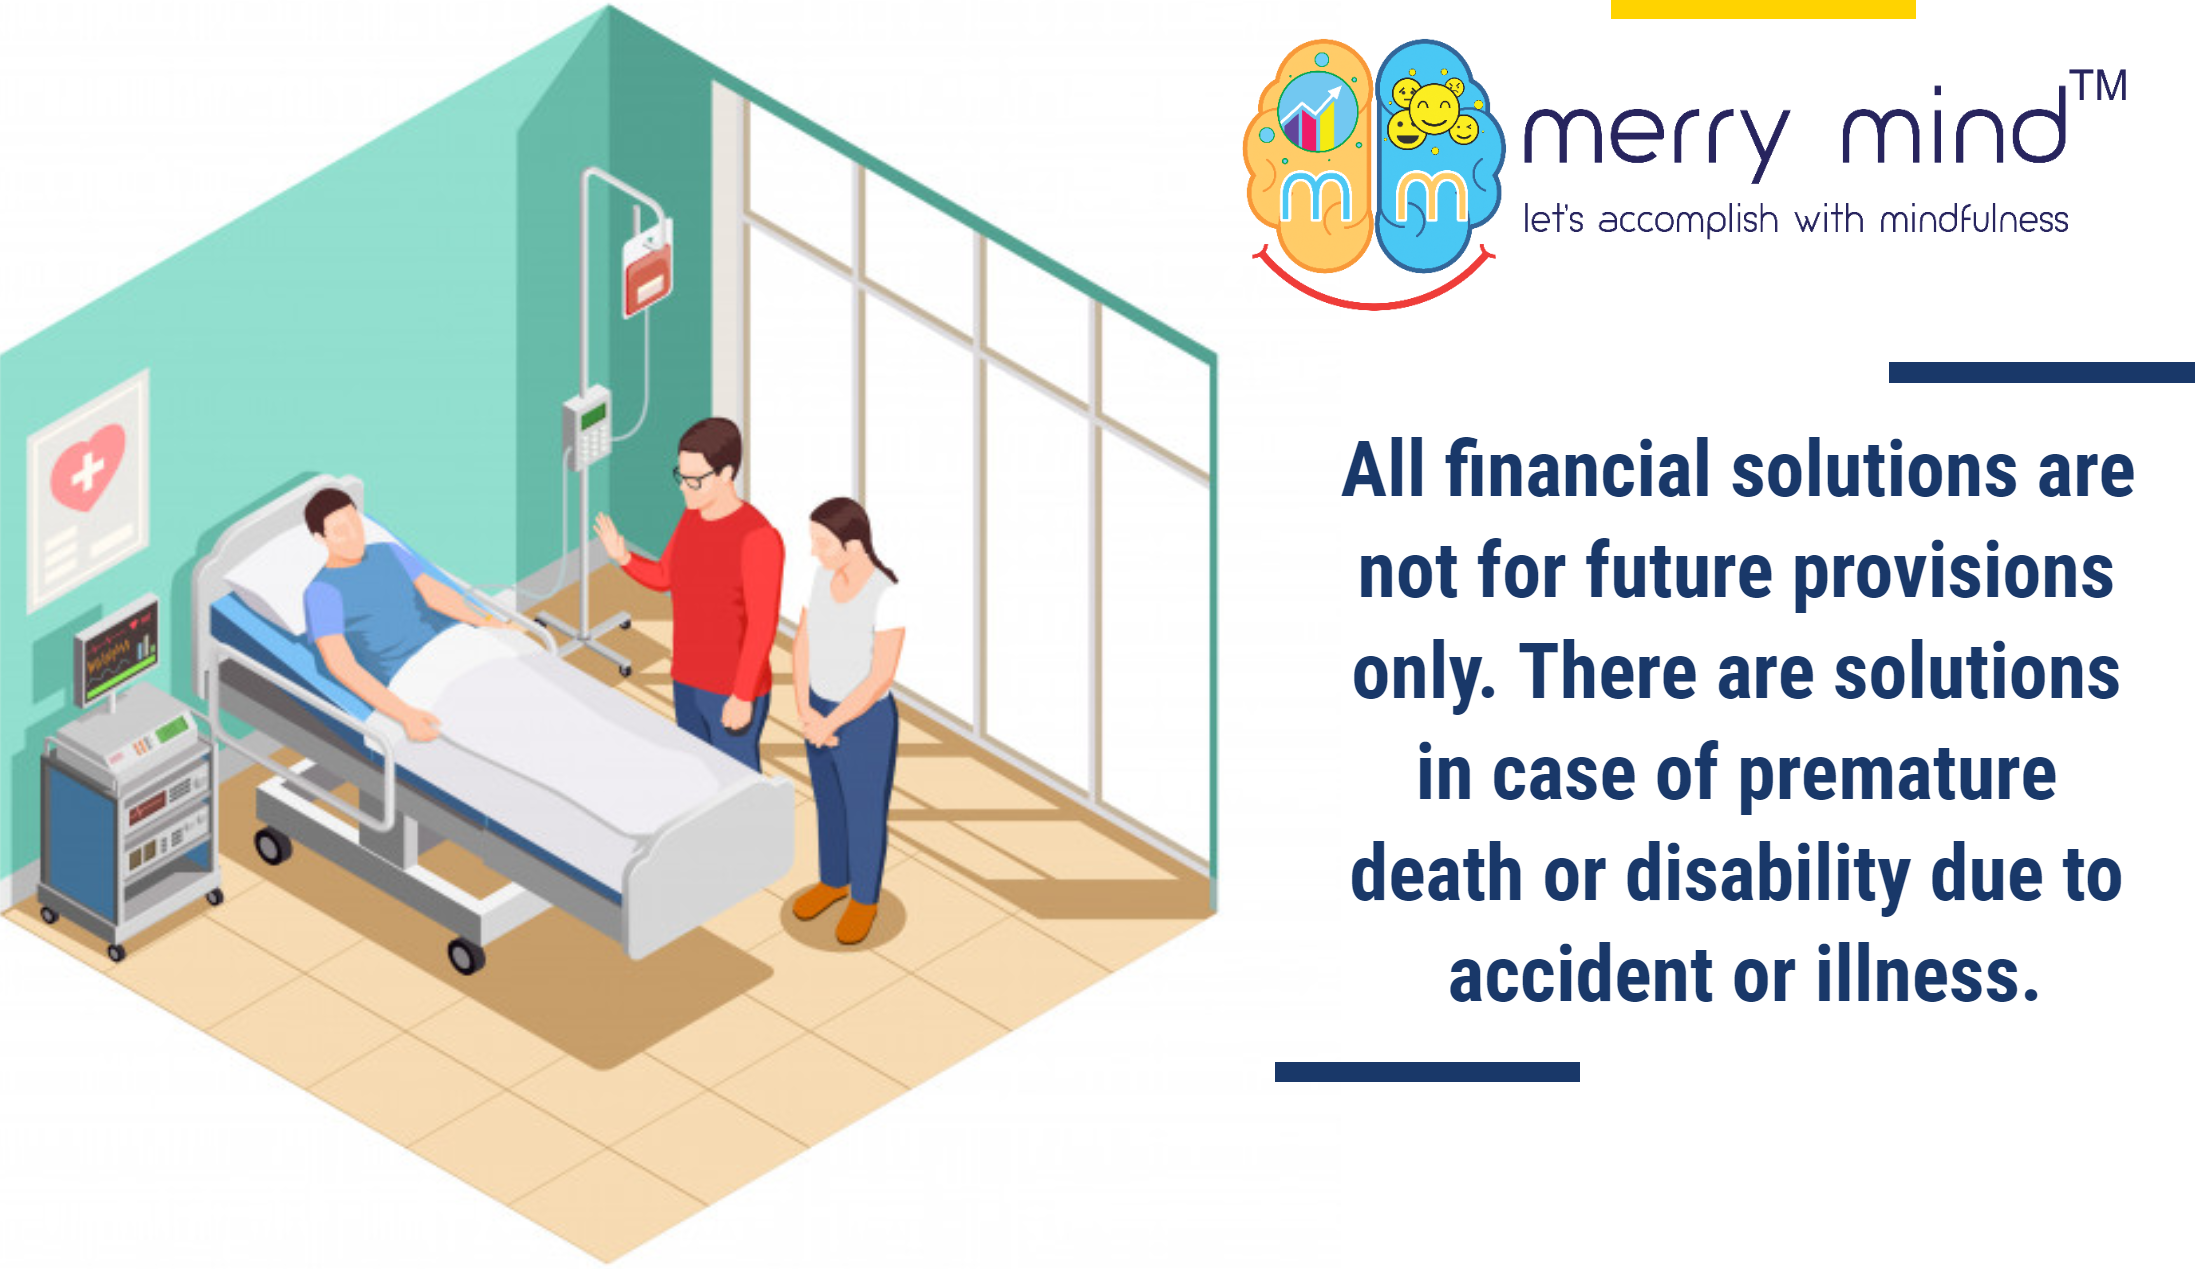 Having adequate insurance coverage, contingency fund maintenance & sharing all personal financial matters with spouse plays a vital role in financial planning